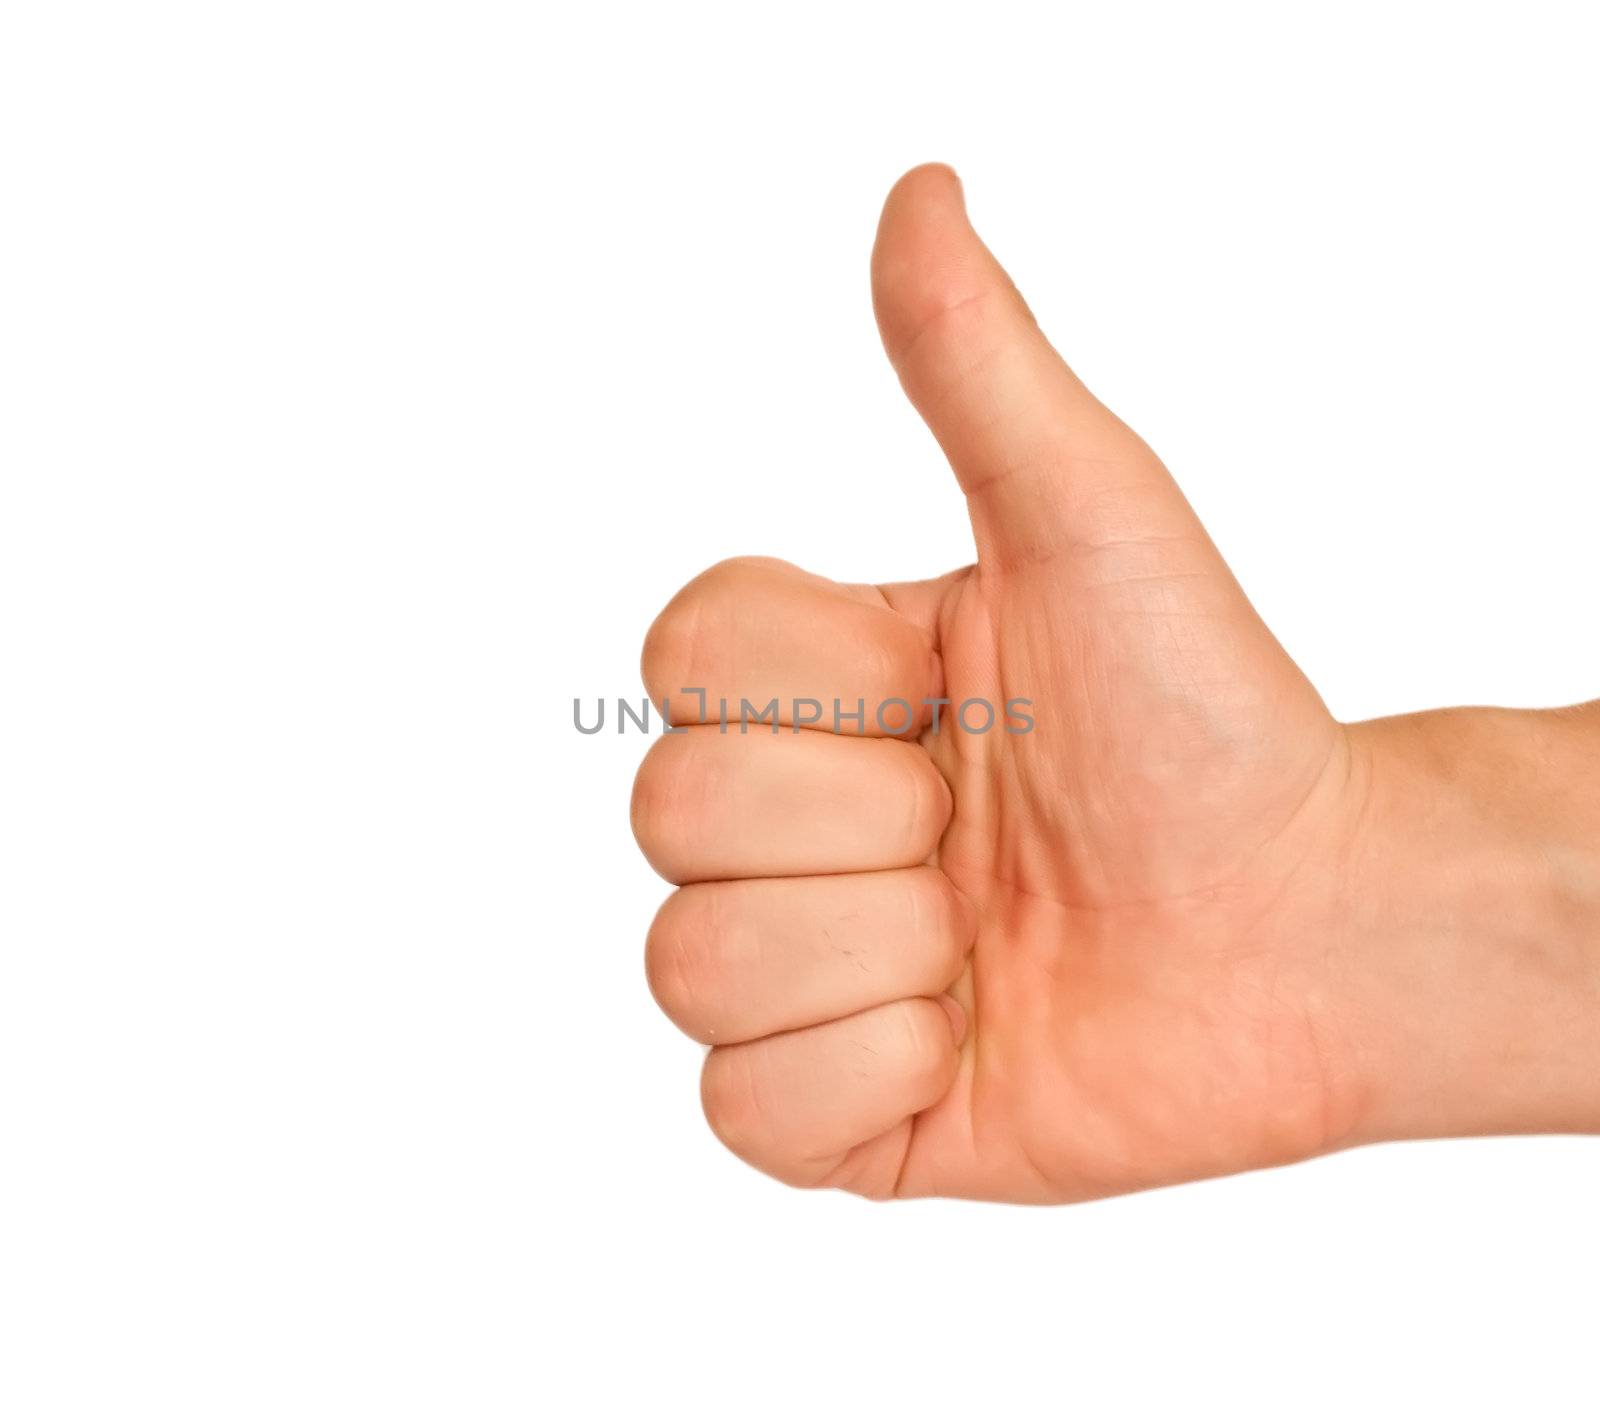 The thumb lifted upwards on a white background by Diversphoto